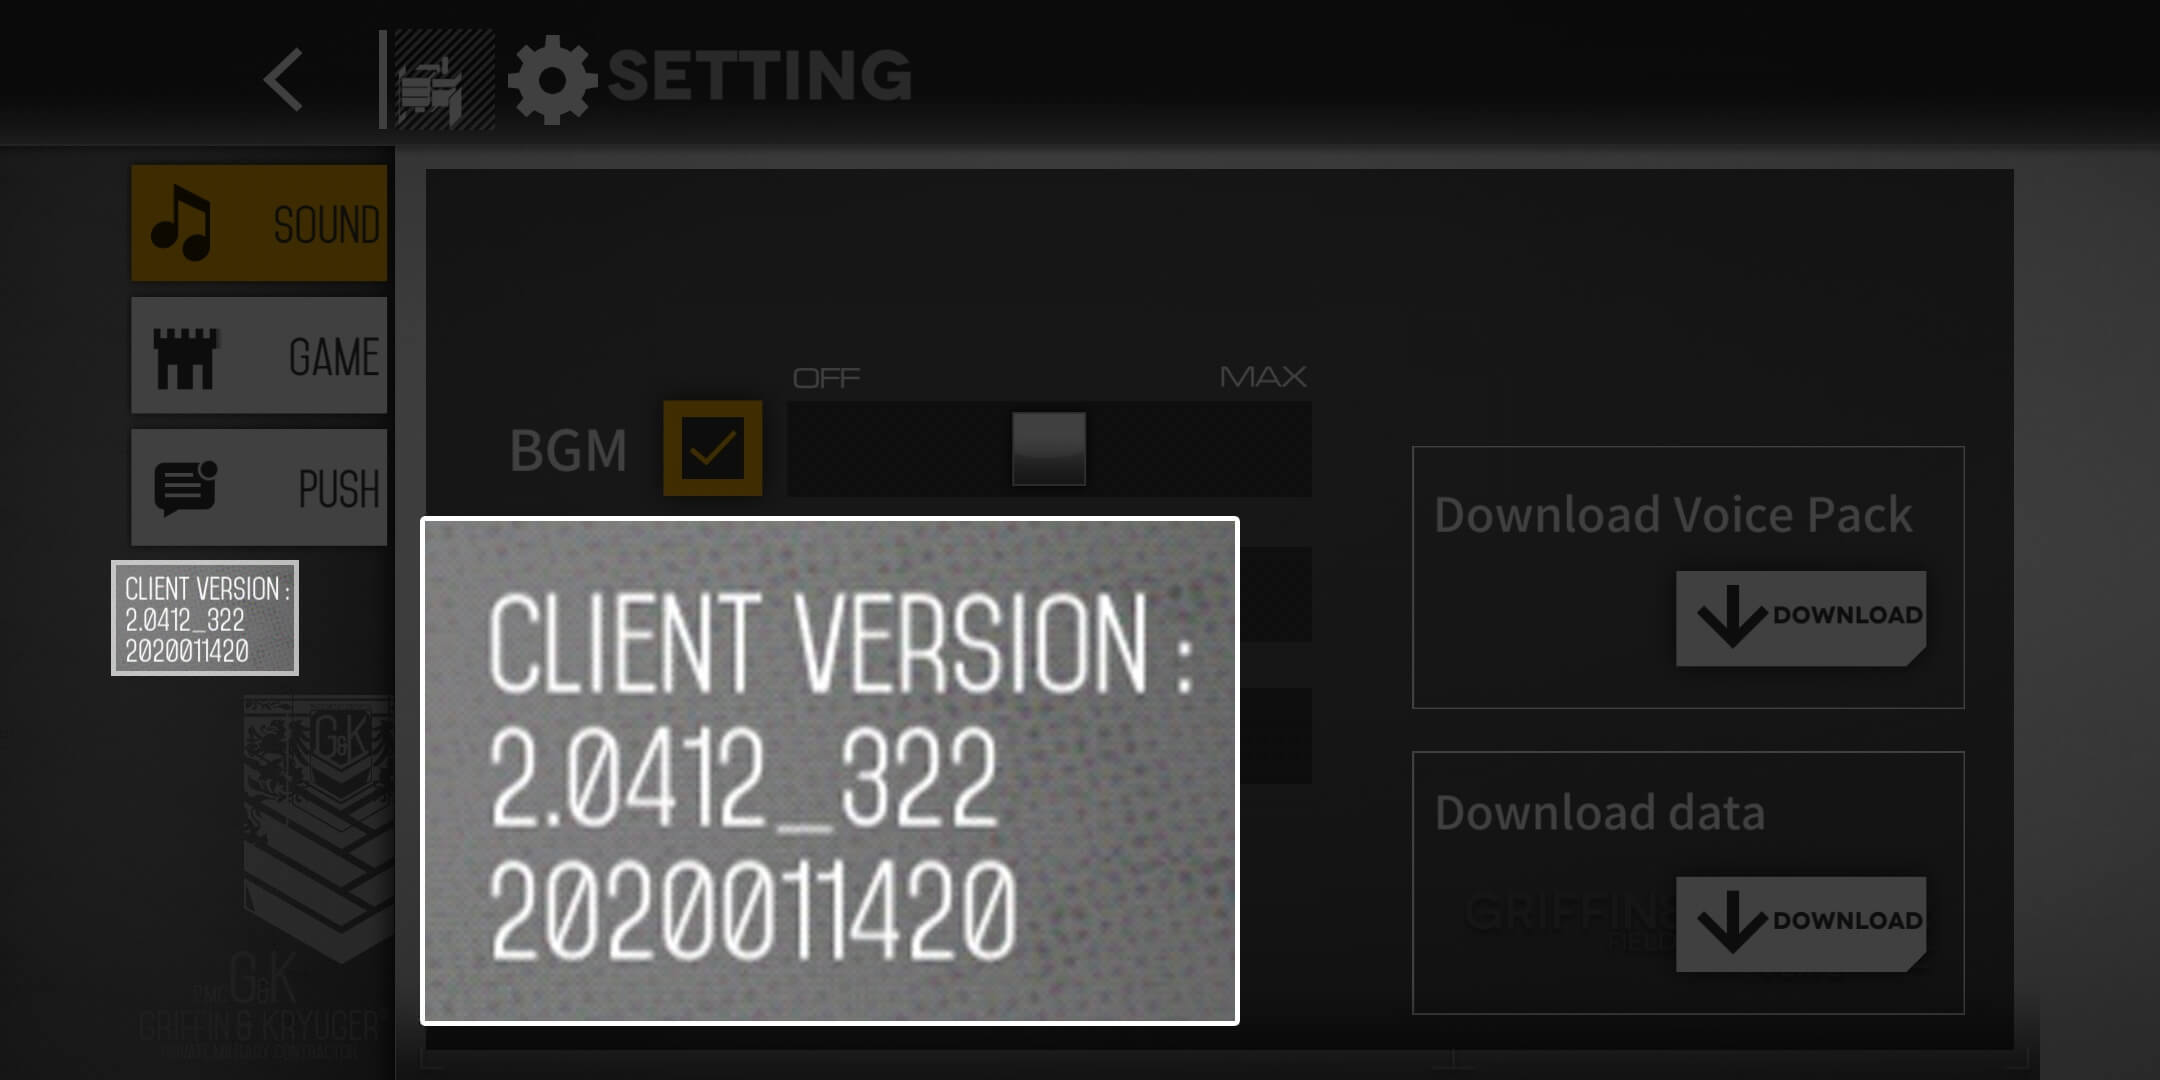 New GFL Client version check reference image